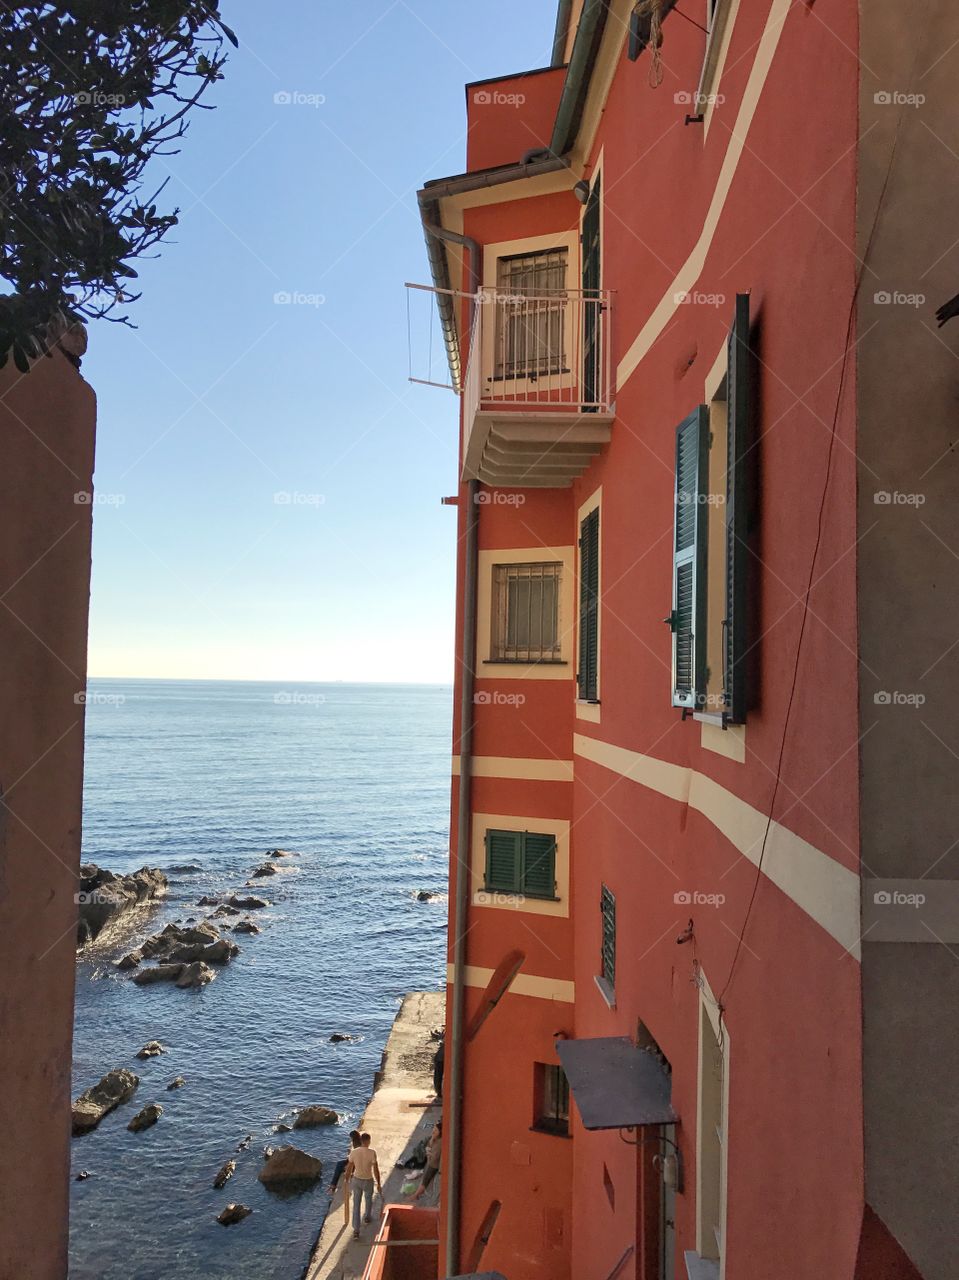 In the picturesque area of ​​Boccadasse, facing the sea on a gorgeous day.